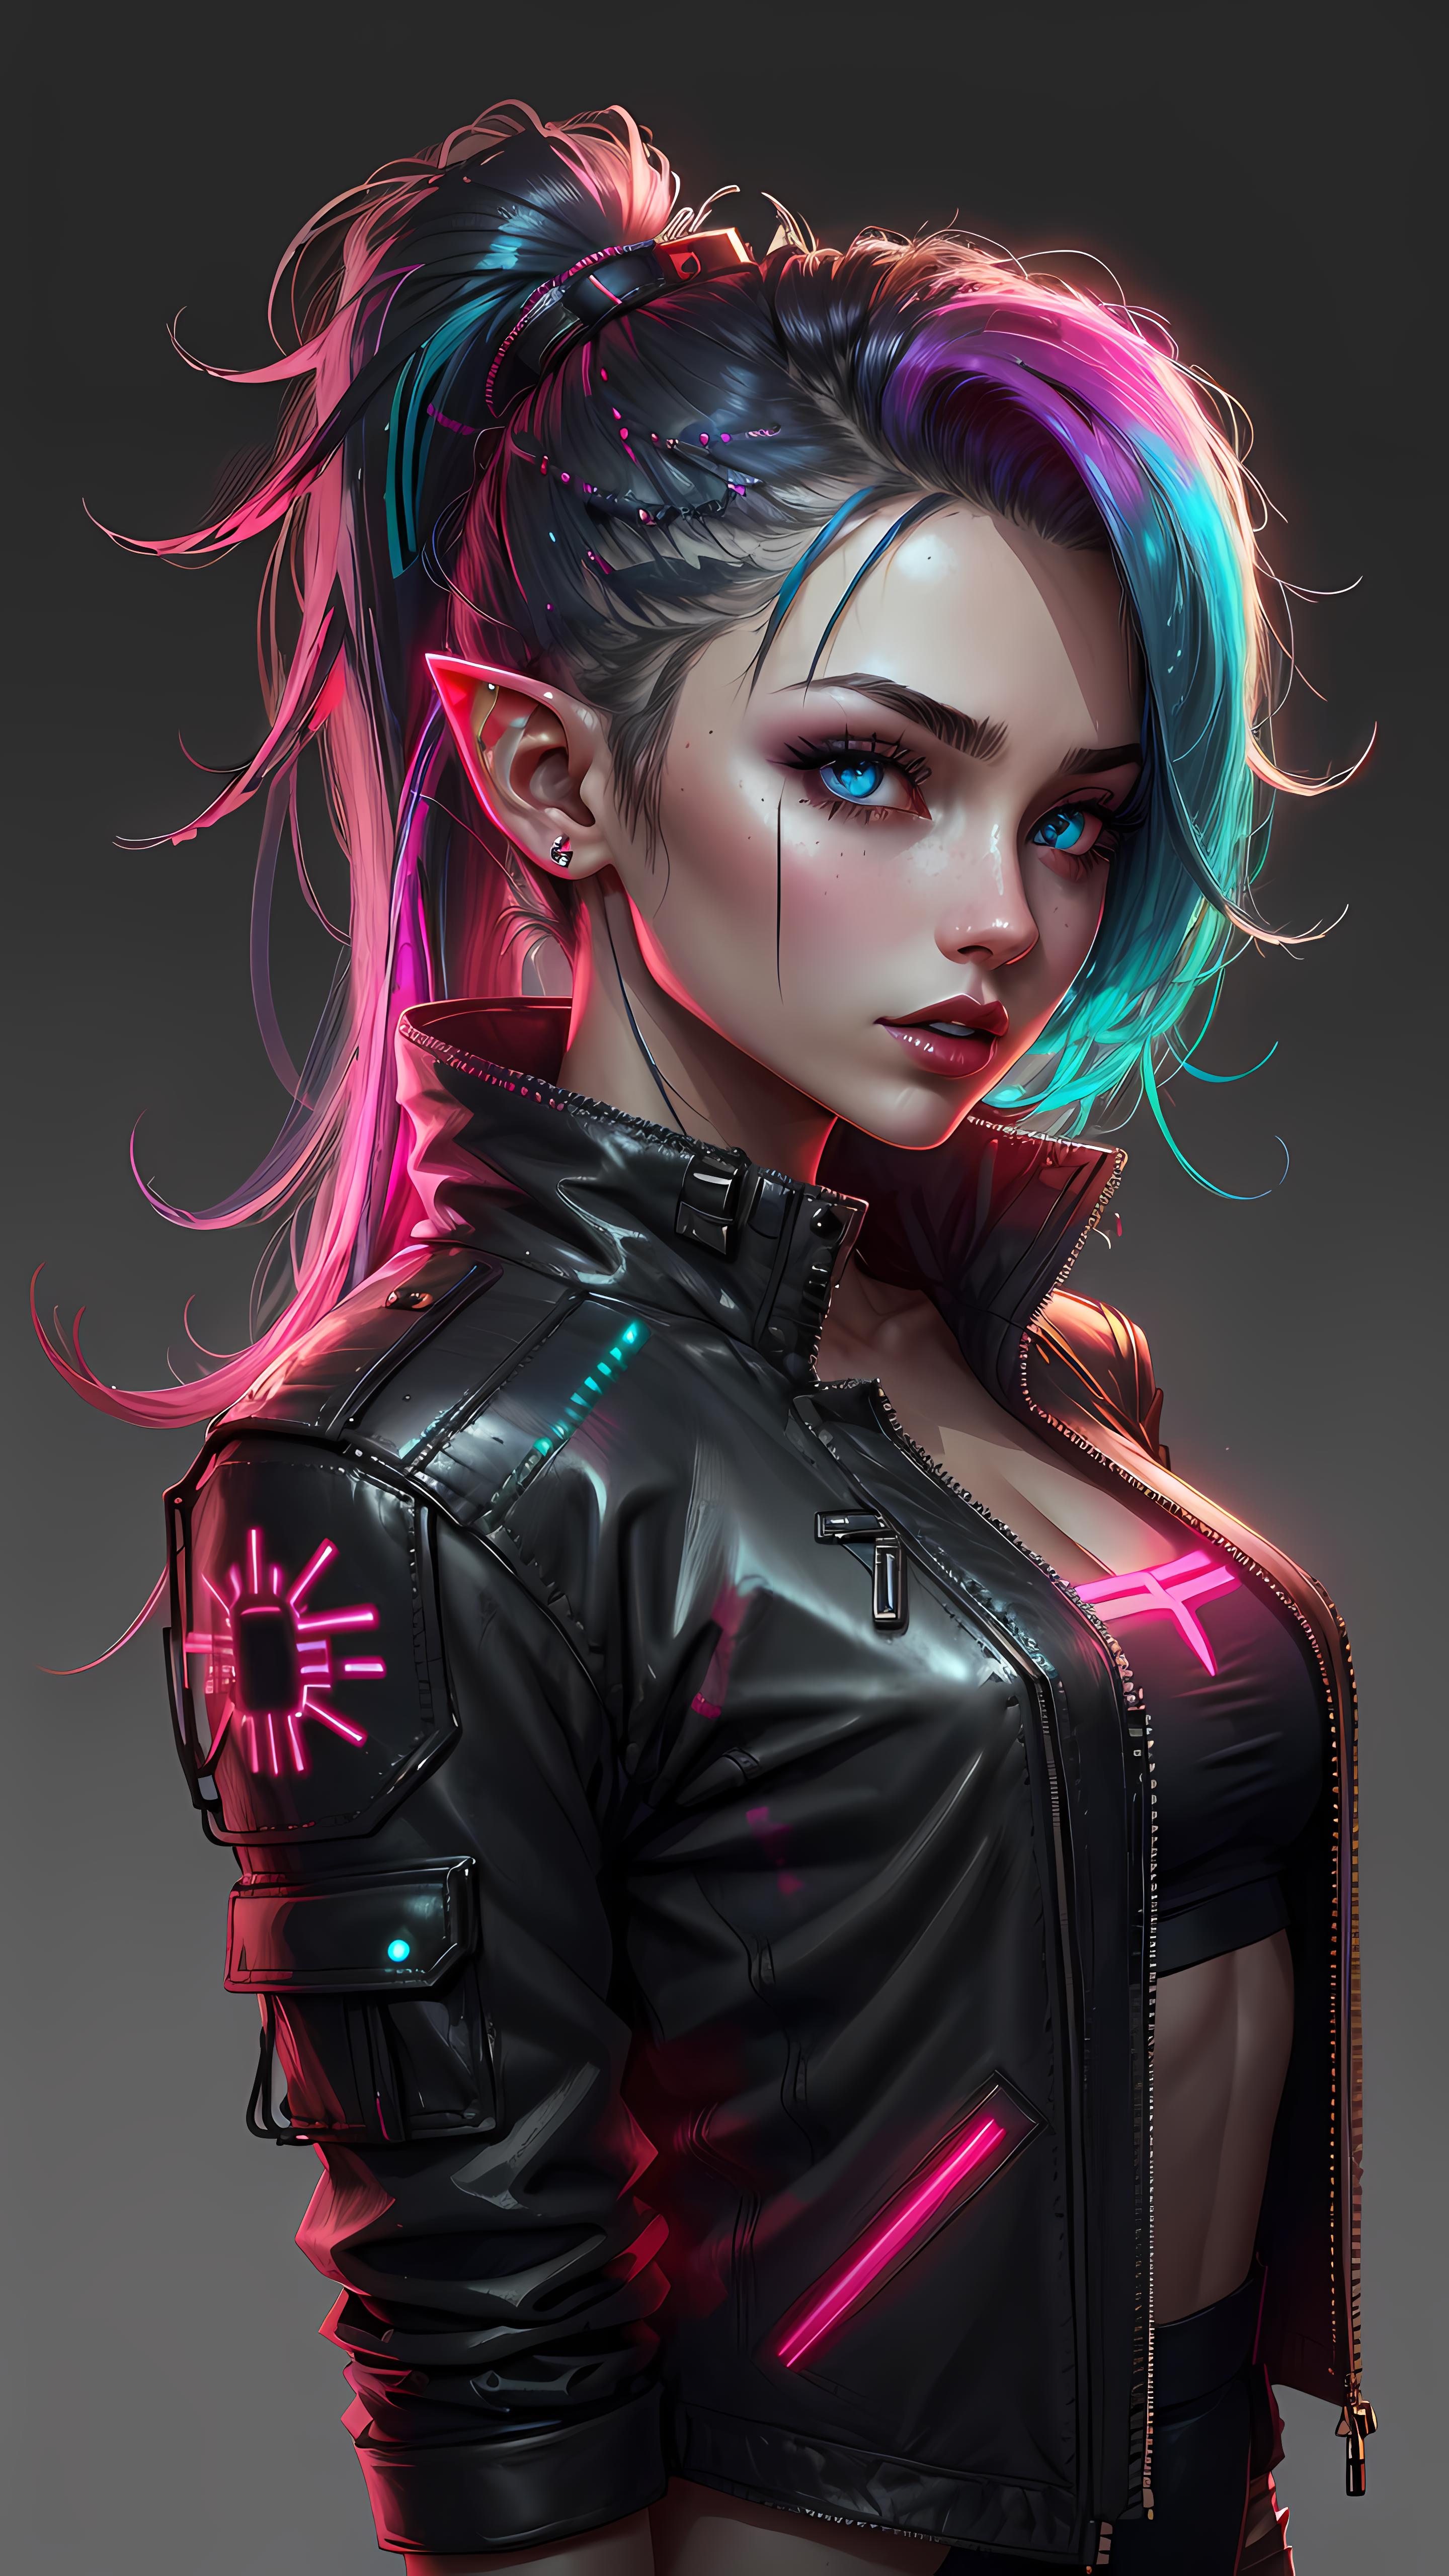 A beautifully drawn, colorful anime girl wearing a black leather jacket.